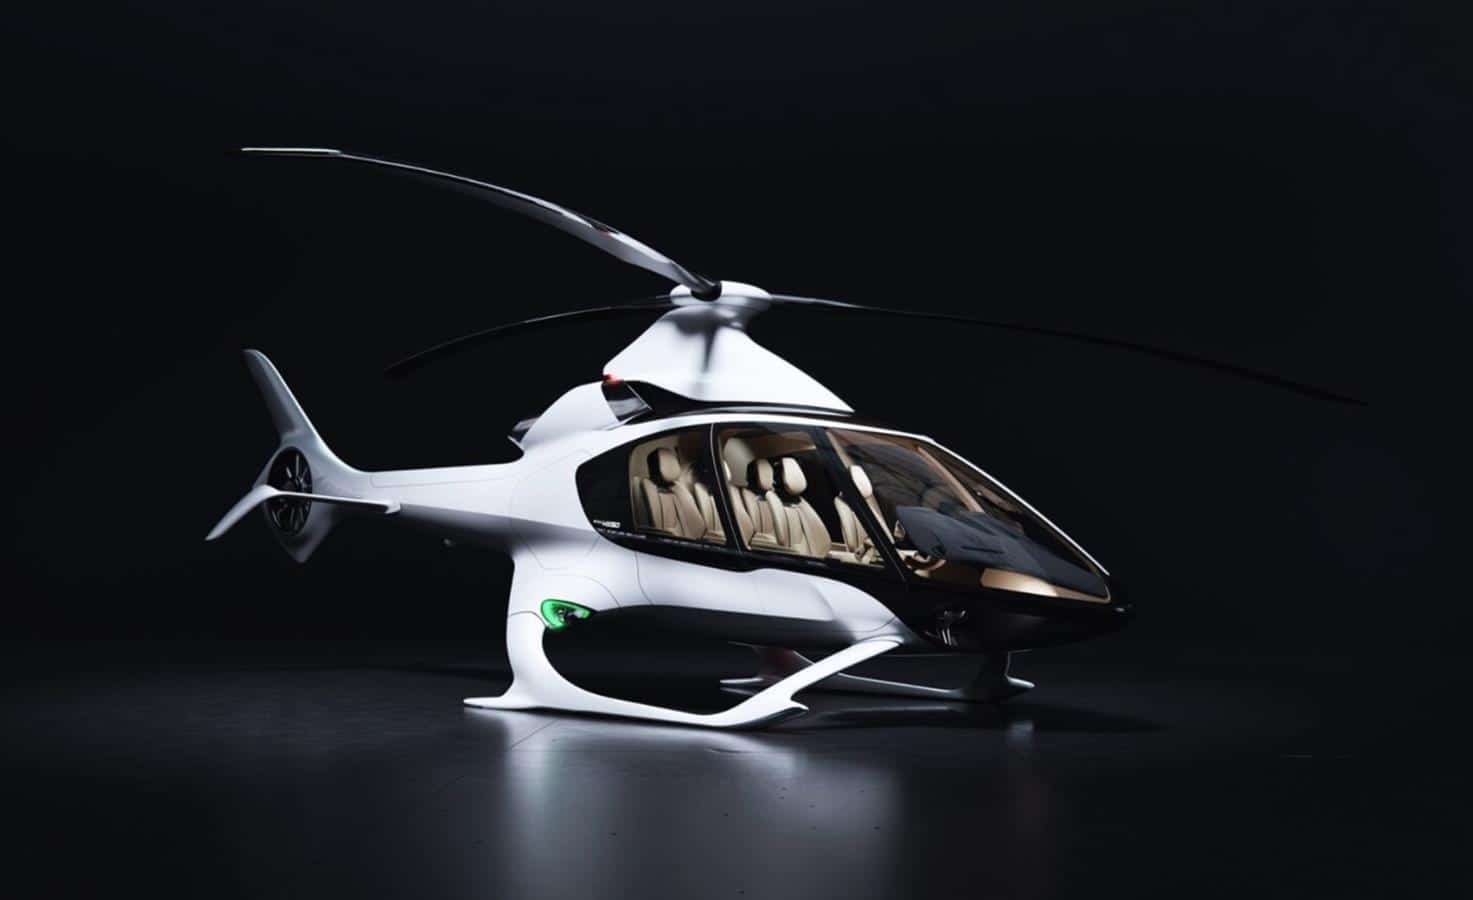 This is a truly modern helicopter.  The HX50 will be unique through and through